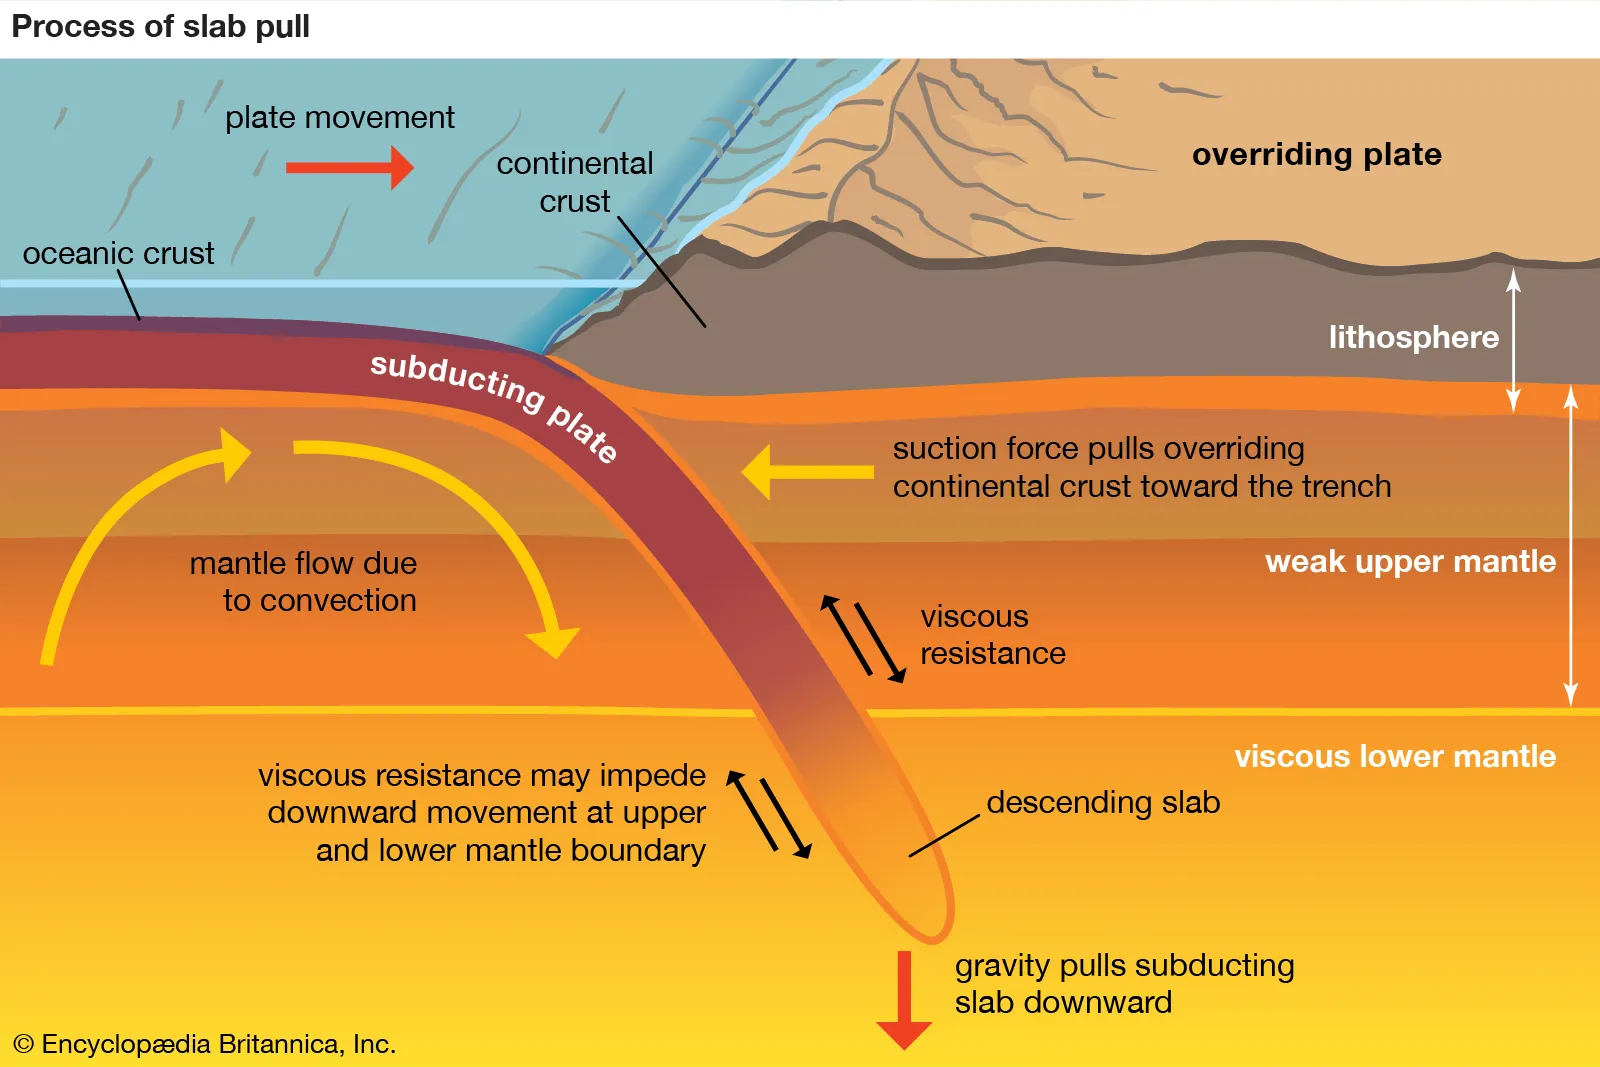 <p>Large scale metamorphism due to plate tectonics and compressional stress.</p>